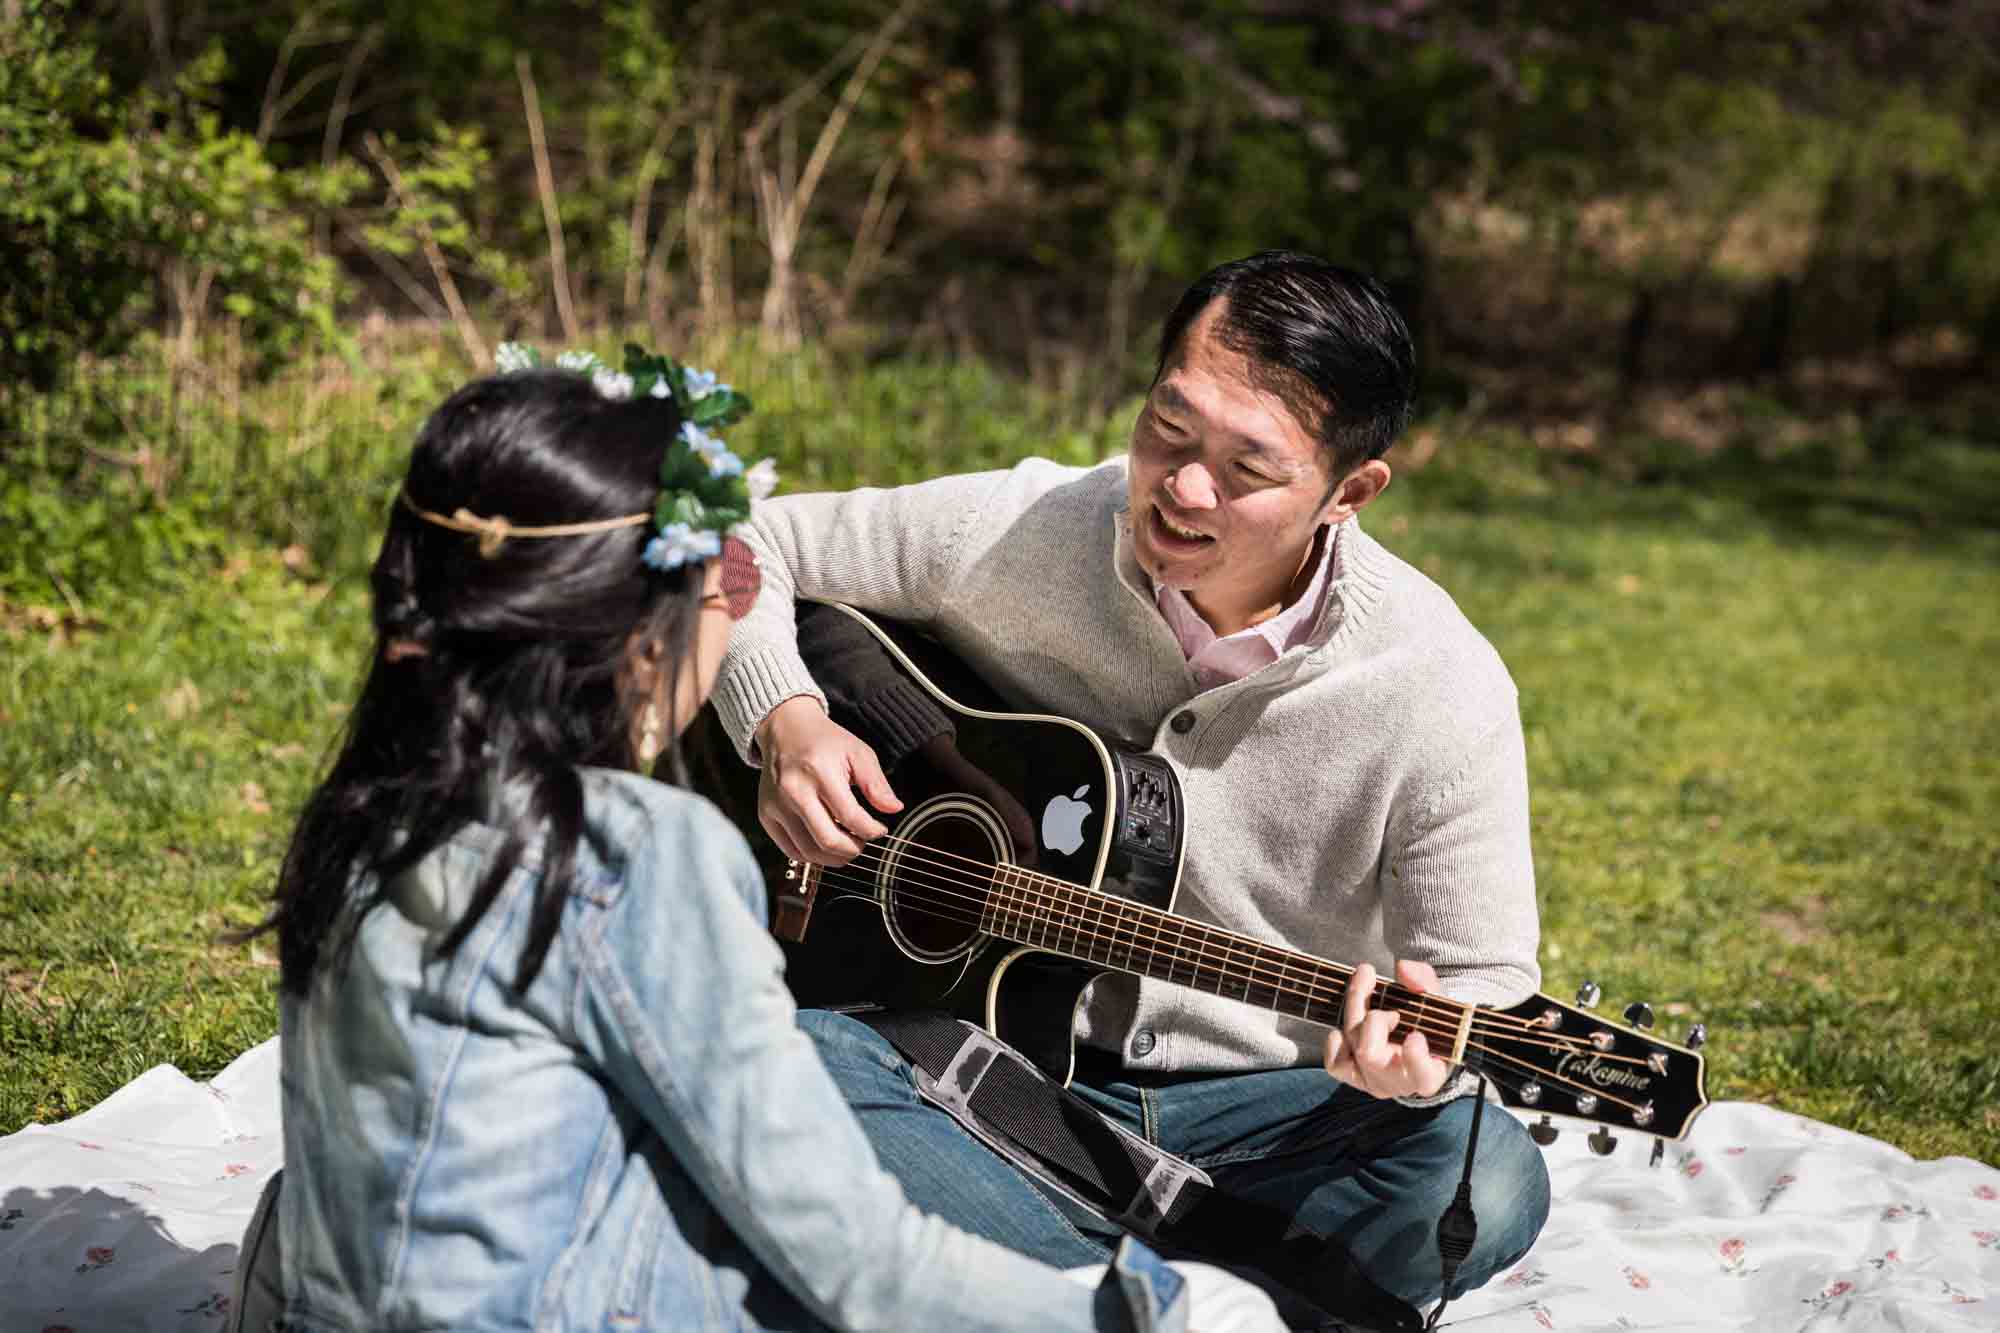 Man playing guitar for woman in park